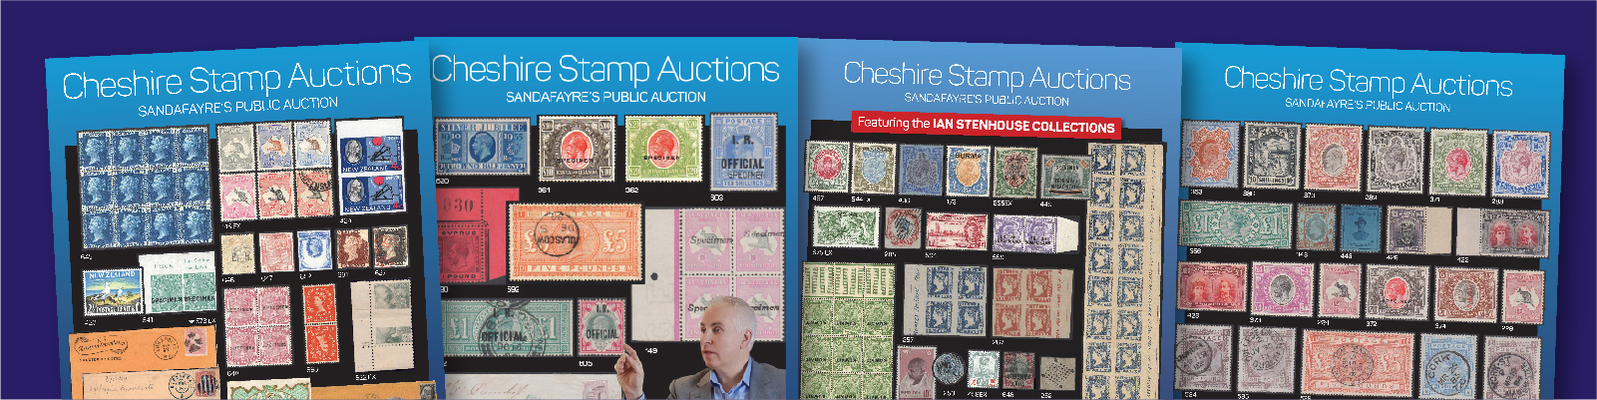 Sandafayre Catalogues and Cheshire Stamp Auctions posters